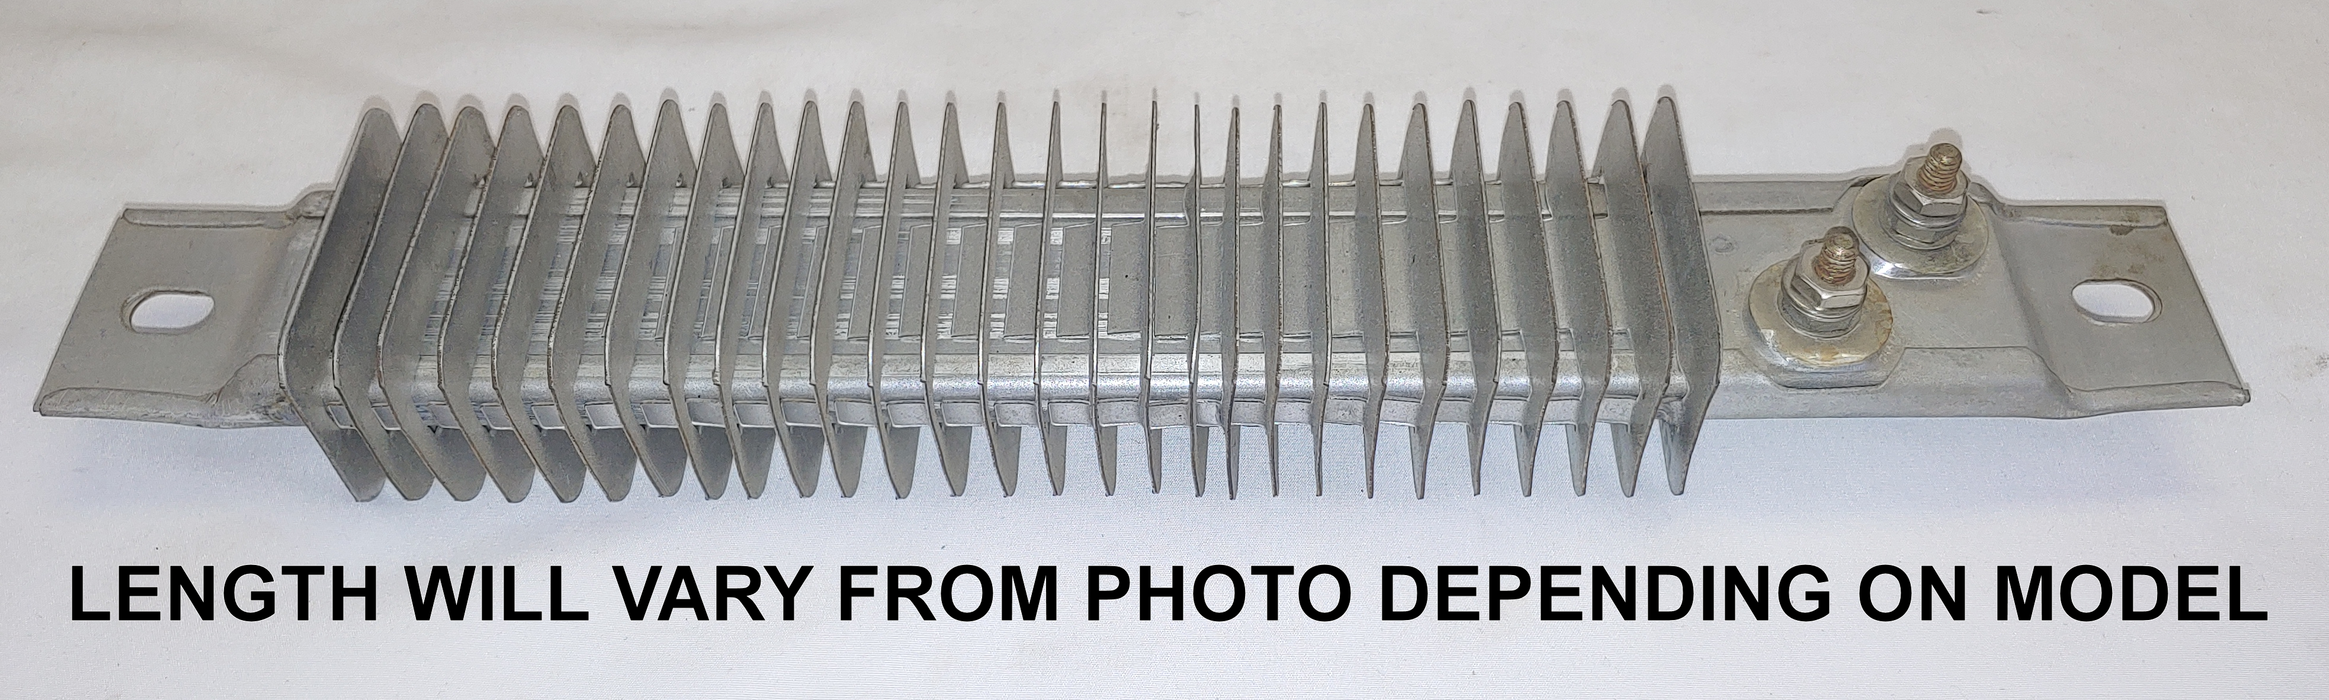 Finned Aluminized Steel Channel Strip Heaters With Mounting Tabs and (2) ﻿#10-32 or #10-24 Screw Terminals Offset (Diagonal) At One End